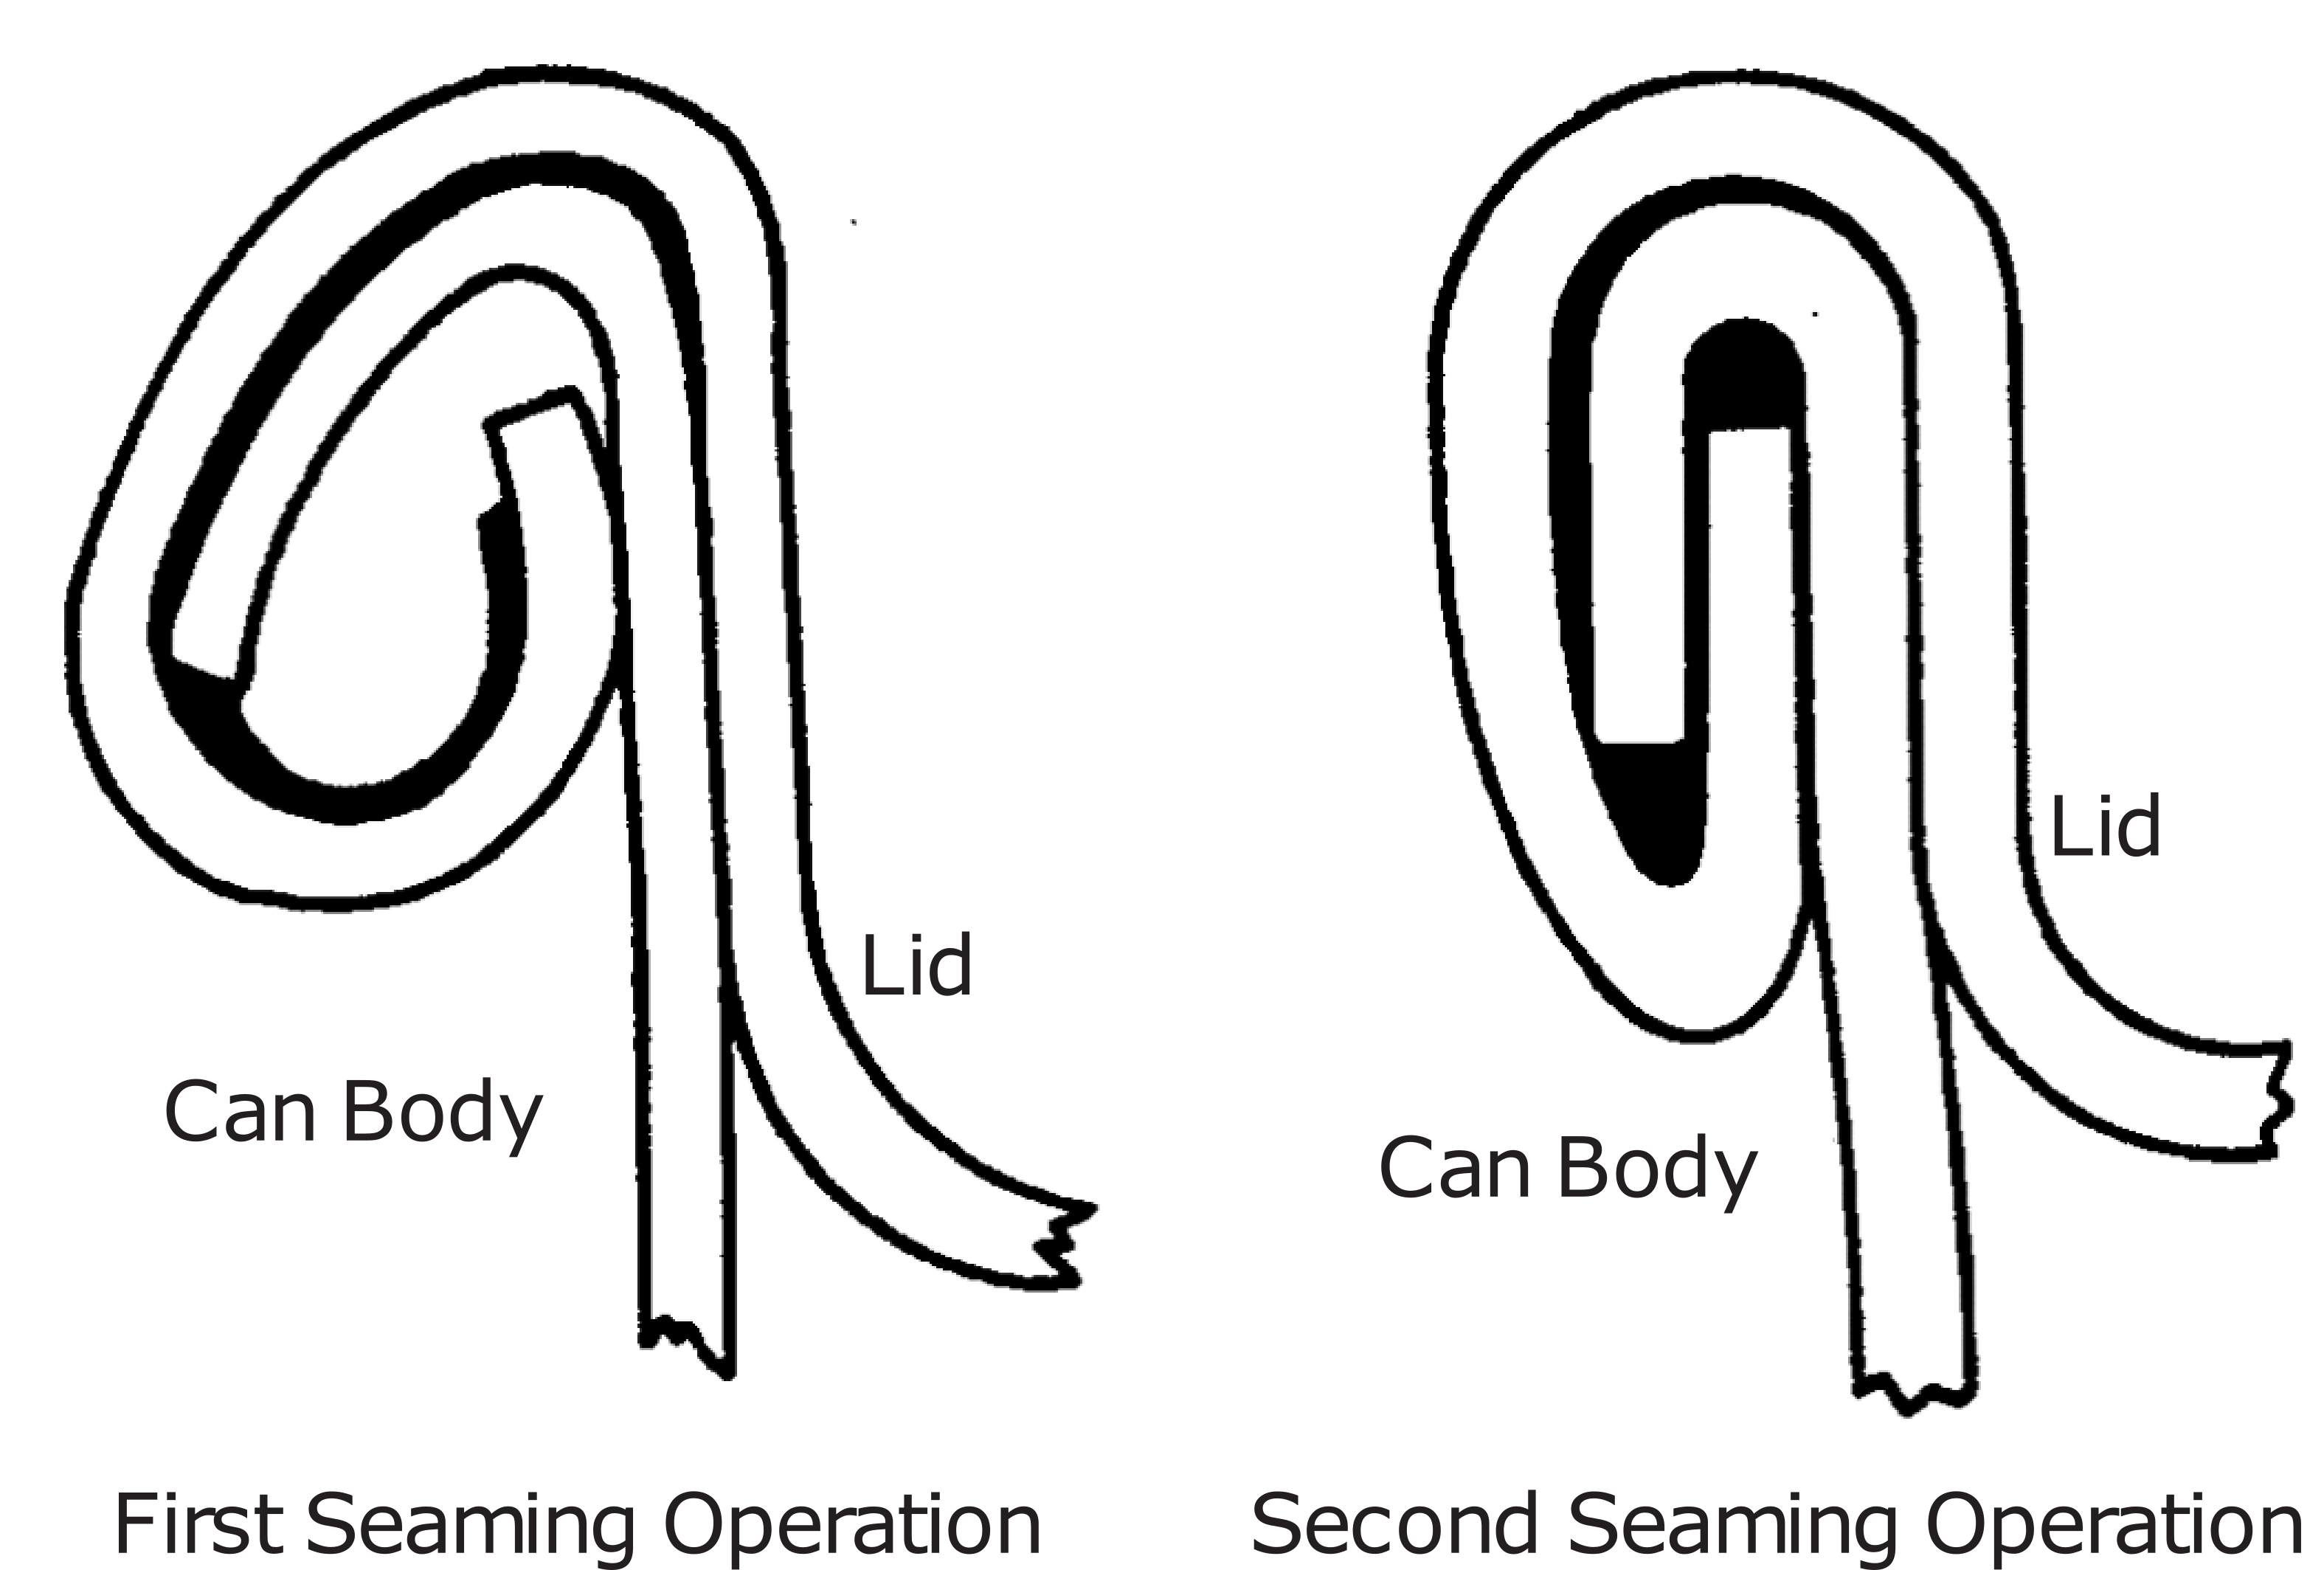 Two seaming Operations labeled can body, lid, and first and second seaming operation